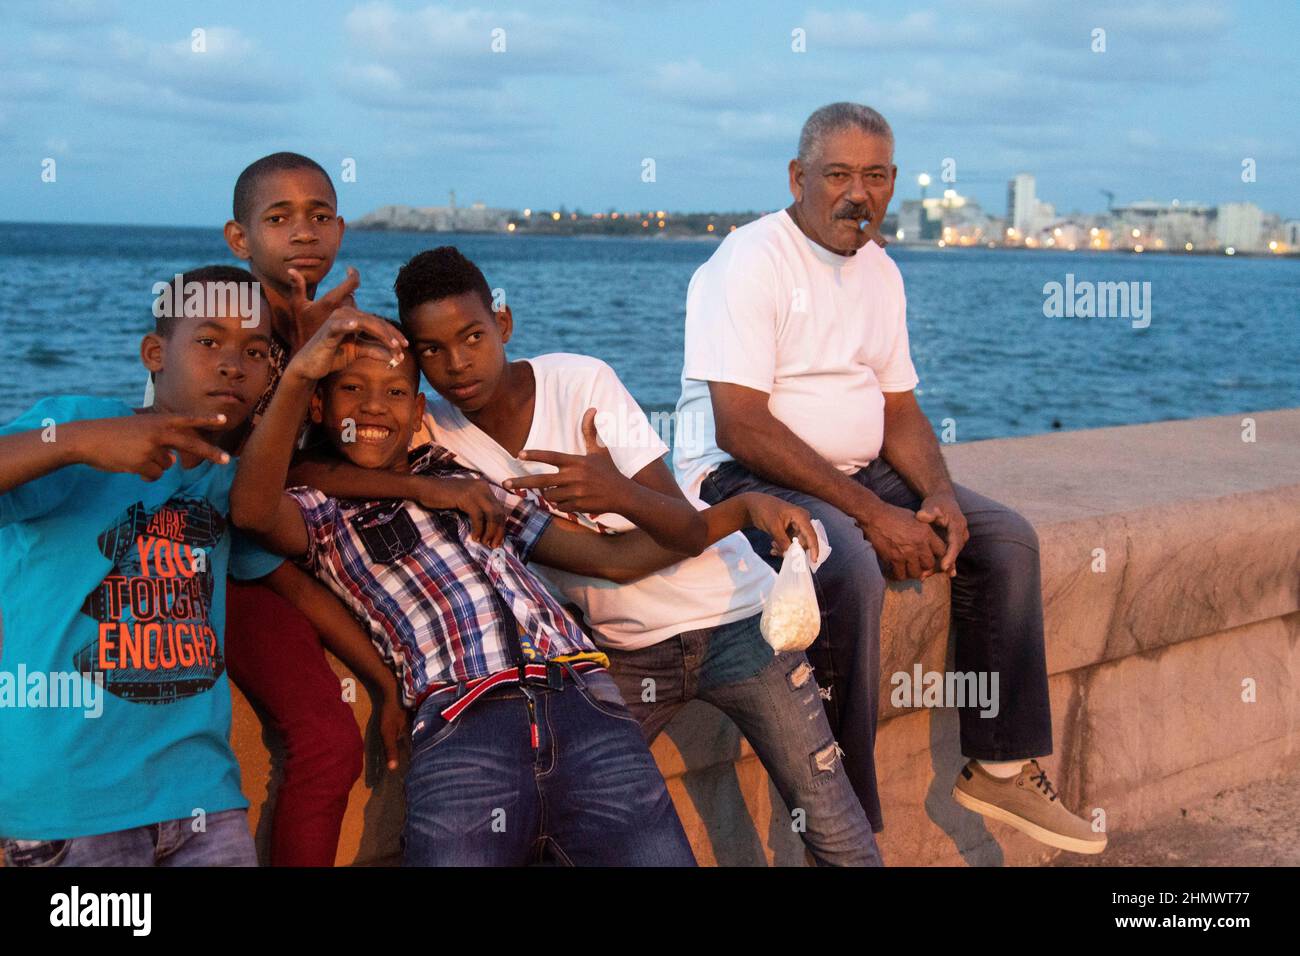 Man smoking cigar sitting with young boy, one holding a bag of popcorn on the malecon seafront in Havana, Cuba. Stock Photo